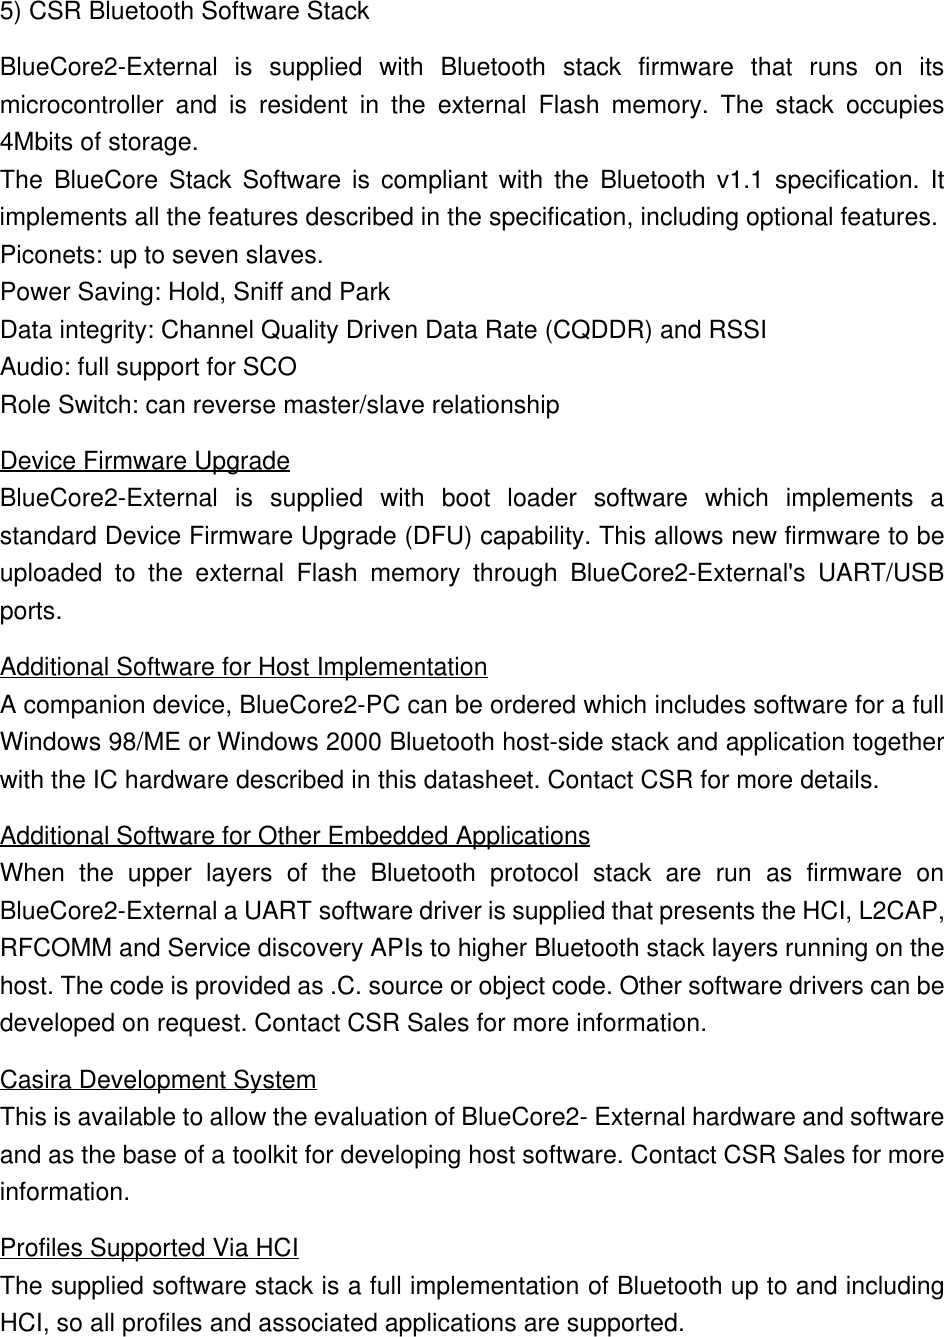 5) CSR Bluetooth Software StackBlueCore2-External is supplied with Bluetooth stack firmware that runs on itsmicrocontroller and is resident in the external Flash memory. The stack occupies4Mbits of storage.The  BlueCore Stack Software is compliant with the Bluetooth v1.1 specification. Itimplements all the features described in the specification, including optional features.Piconets: up to seven slaves.   Power Saving: Hold, Sniff and ParkData integrity: Channel Quality Driven Data Rate (CQDDR) and RSSIAudio: full support for SCORole Switch: can reverse master/slave relationshipDevice Firmware UpgradeBlueCore2-External is supplied with boot loader software which implements astandard Device Firmware Upgrade (DFU) capability. This allows new firmware to beuploaded to the external Flash memory through BlueCore2-External&apos;s UART/USBports.Additional Software for Host ImplementationA companion device, BlueCore2-PC can be ordered which includes software for a fullWindows 98/ME or Windows 2000 Bluetooth host-side stack and application togetherwith the IC hardware described in this datasheet. Contact CSR for more details.Additional Software for Other Embedded ApplicationsWhen the upper layers of the Bluetooth protocol stack are run as firmware onBlueCore2-External a UART software driver is supplied that presents the HCI, L2CAP,RFCOMM and Service discovery APIs to higher Bluetooth stack layers running on thehost. The code is provided as .C. source or object code. Other software drivers can bedeveloped on request. Contact CSR Sales for more information.Casira Development SystemThis is available to allow the evaluation of BlueCore2- External hardware and softwareand as the base of a toolkit for developing host software. Contact CSR Sales for moreinformation.Profiles Supported Via HCIThe supplied software stack is a full implementation of Bluetooth up to and includingHCI, so all profiles and associated applications are supported.